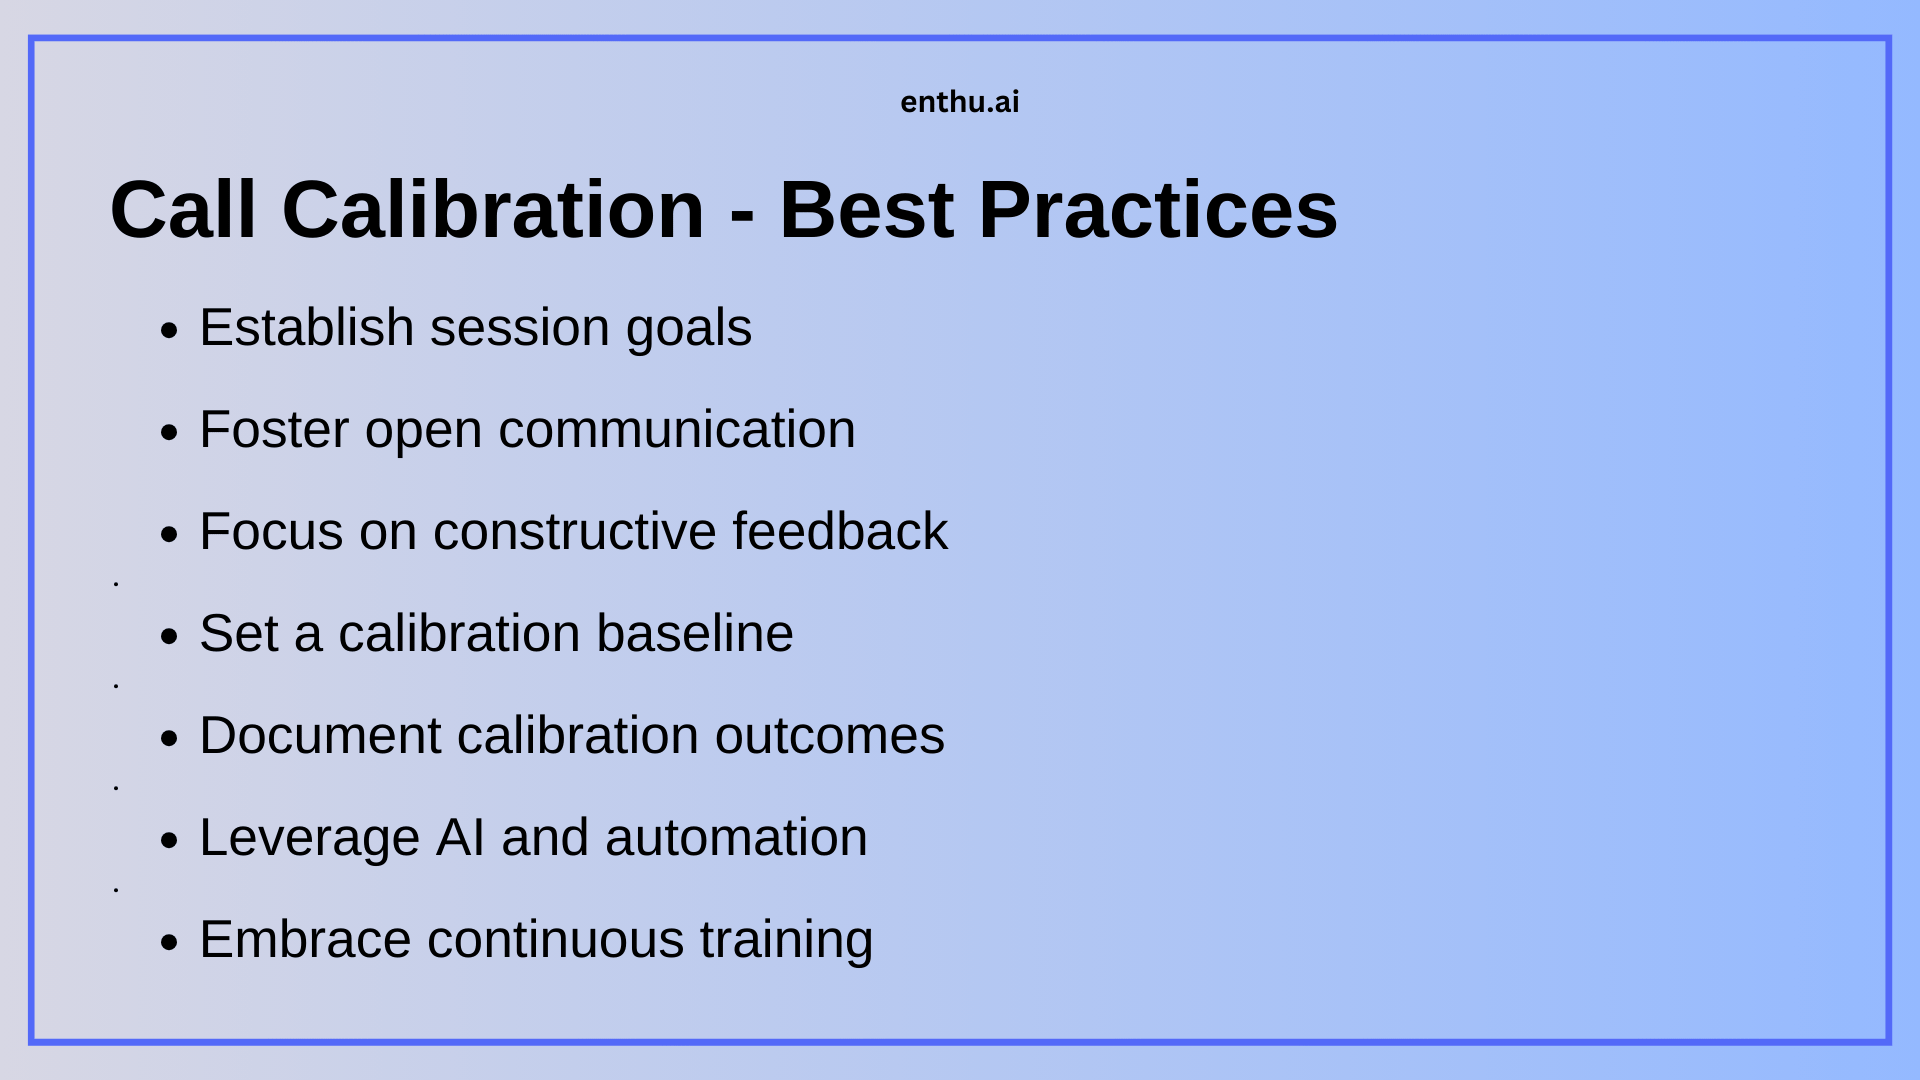 Call Calibration - Best Practices